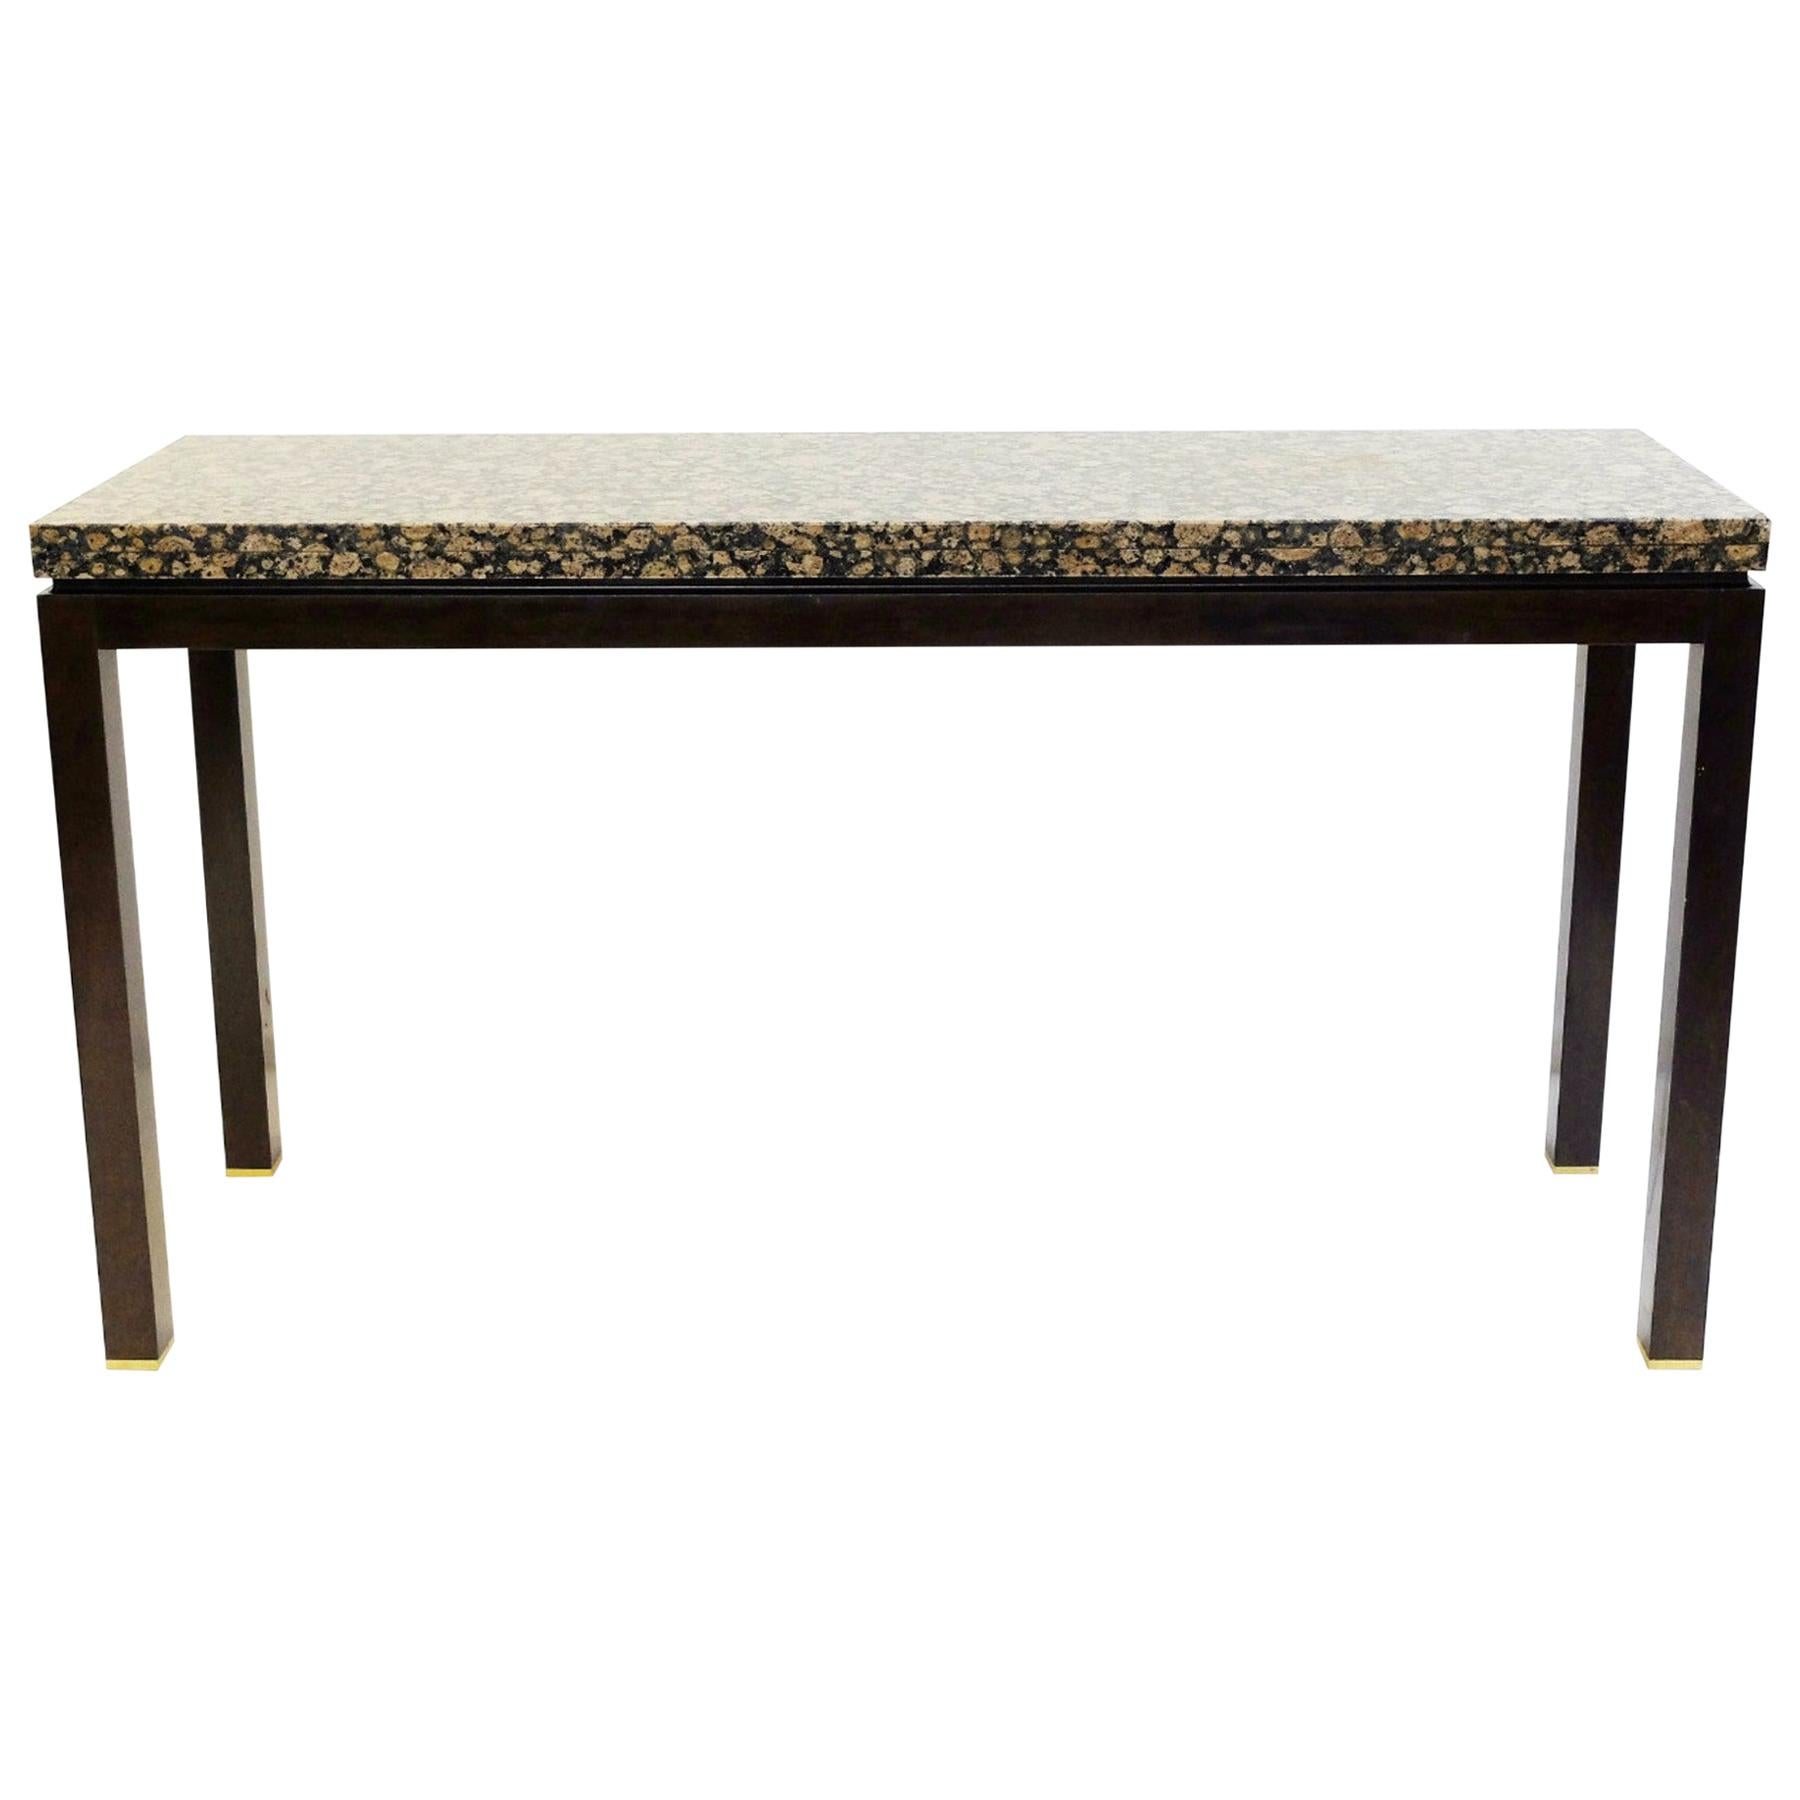 Granite and Wood Console, At. to E. J. Wormley